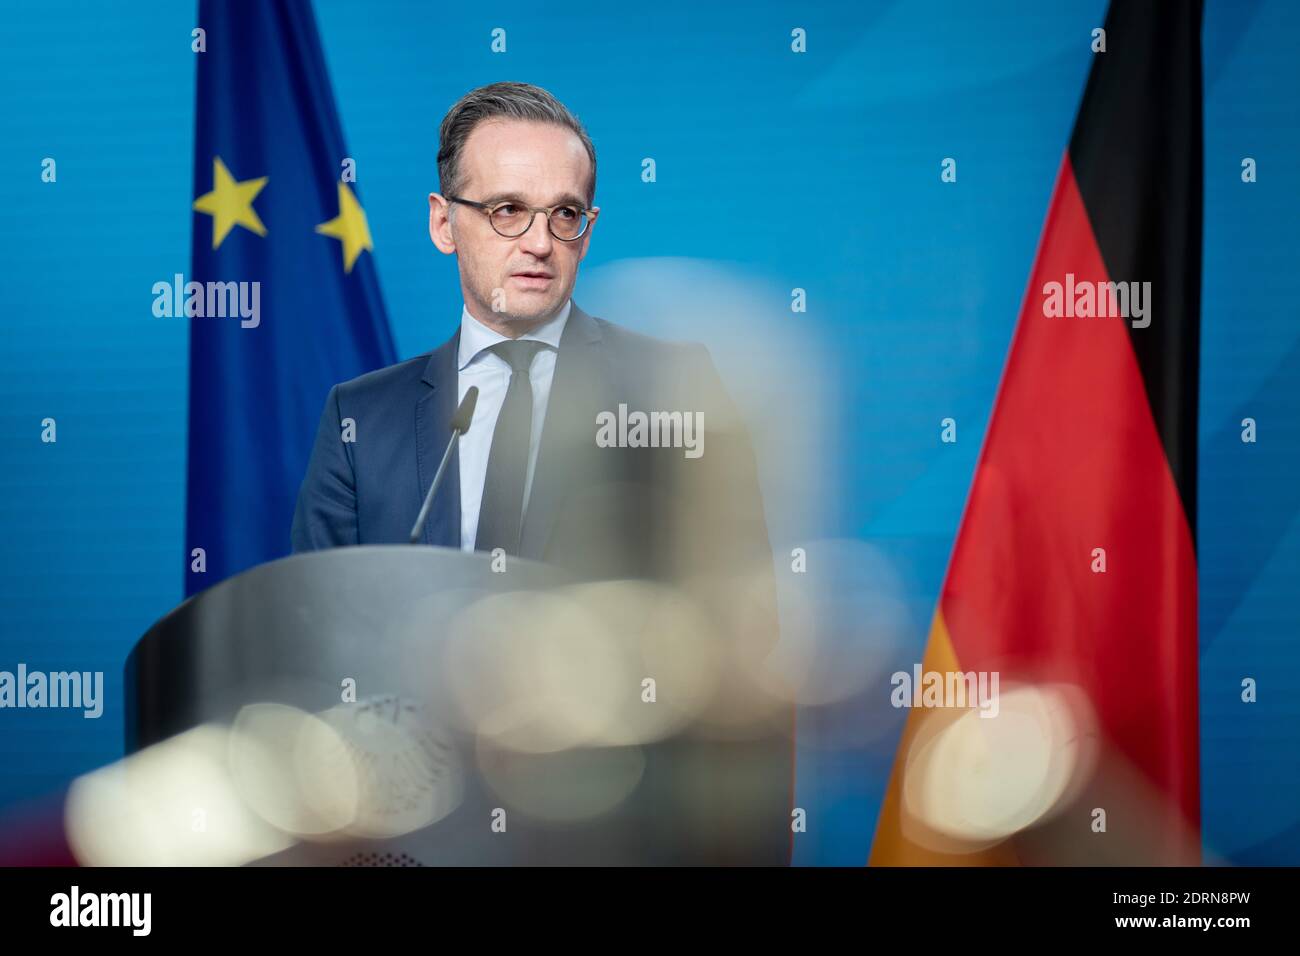 Berlin, Germany. 21st Dec, 2020. Heiko Maas (SPD), Foreign Minister, gives a press conference on the informal virtual meeting of the foreign ministers of the member states of the Vienna nuclear agreement - JCPoA. Credit: Kay Nietfeld/dpa/Alamy Live News Stock Photo